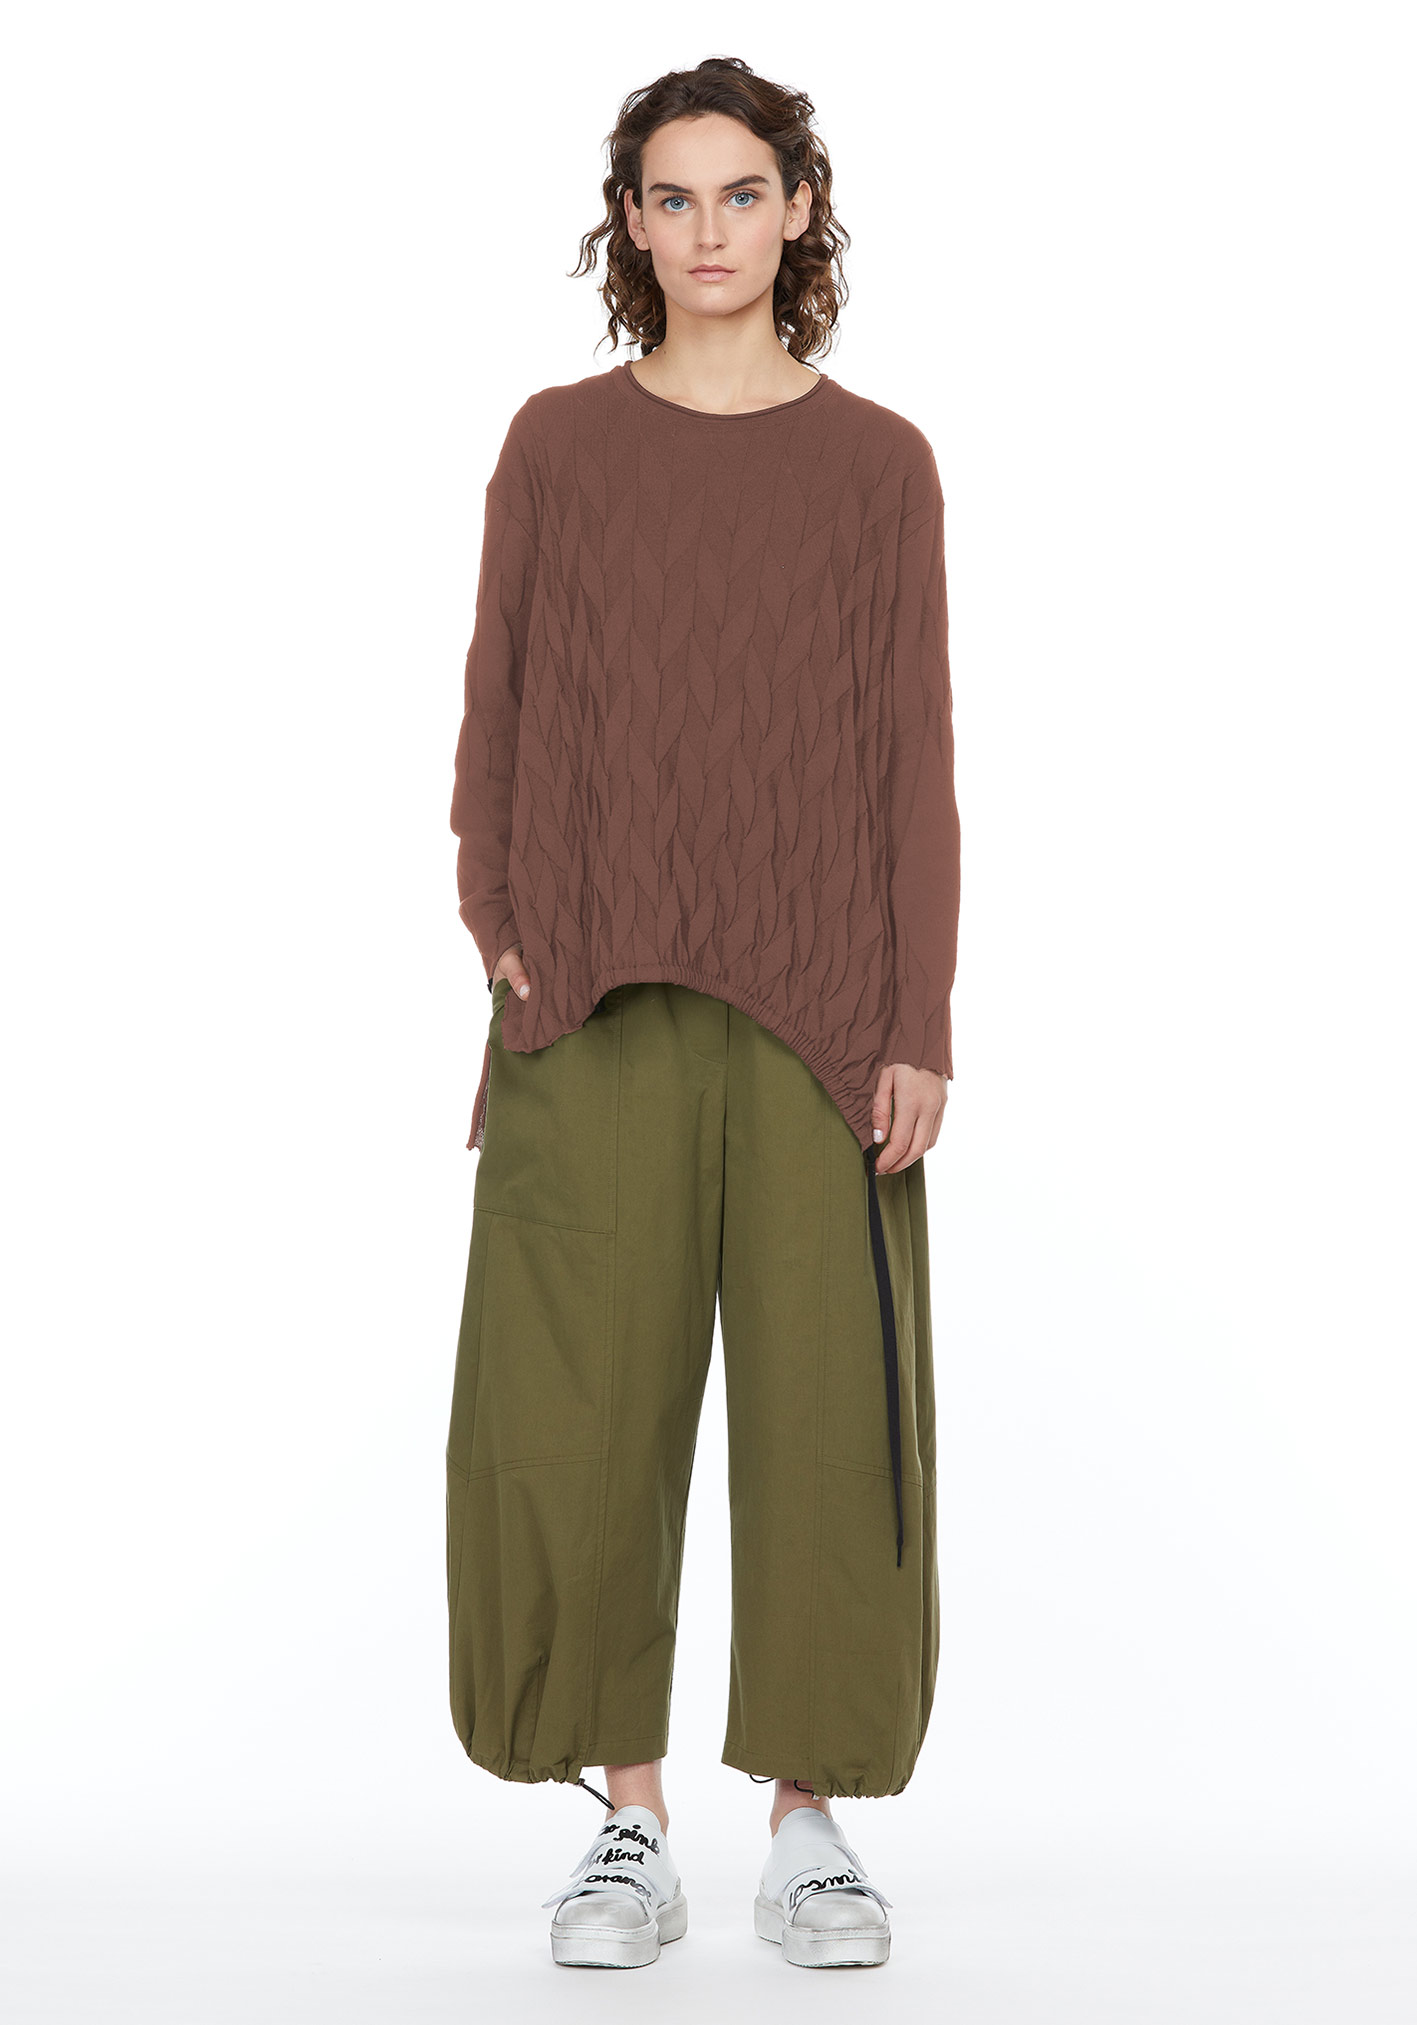 buy the latest Chevron Drawcord Jumper Relaxed online